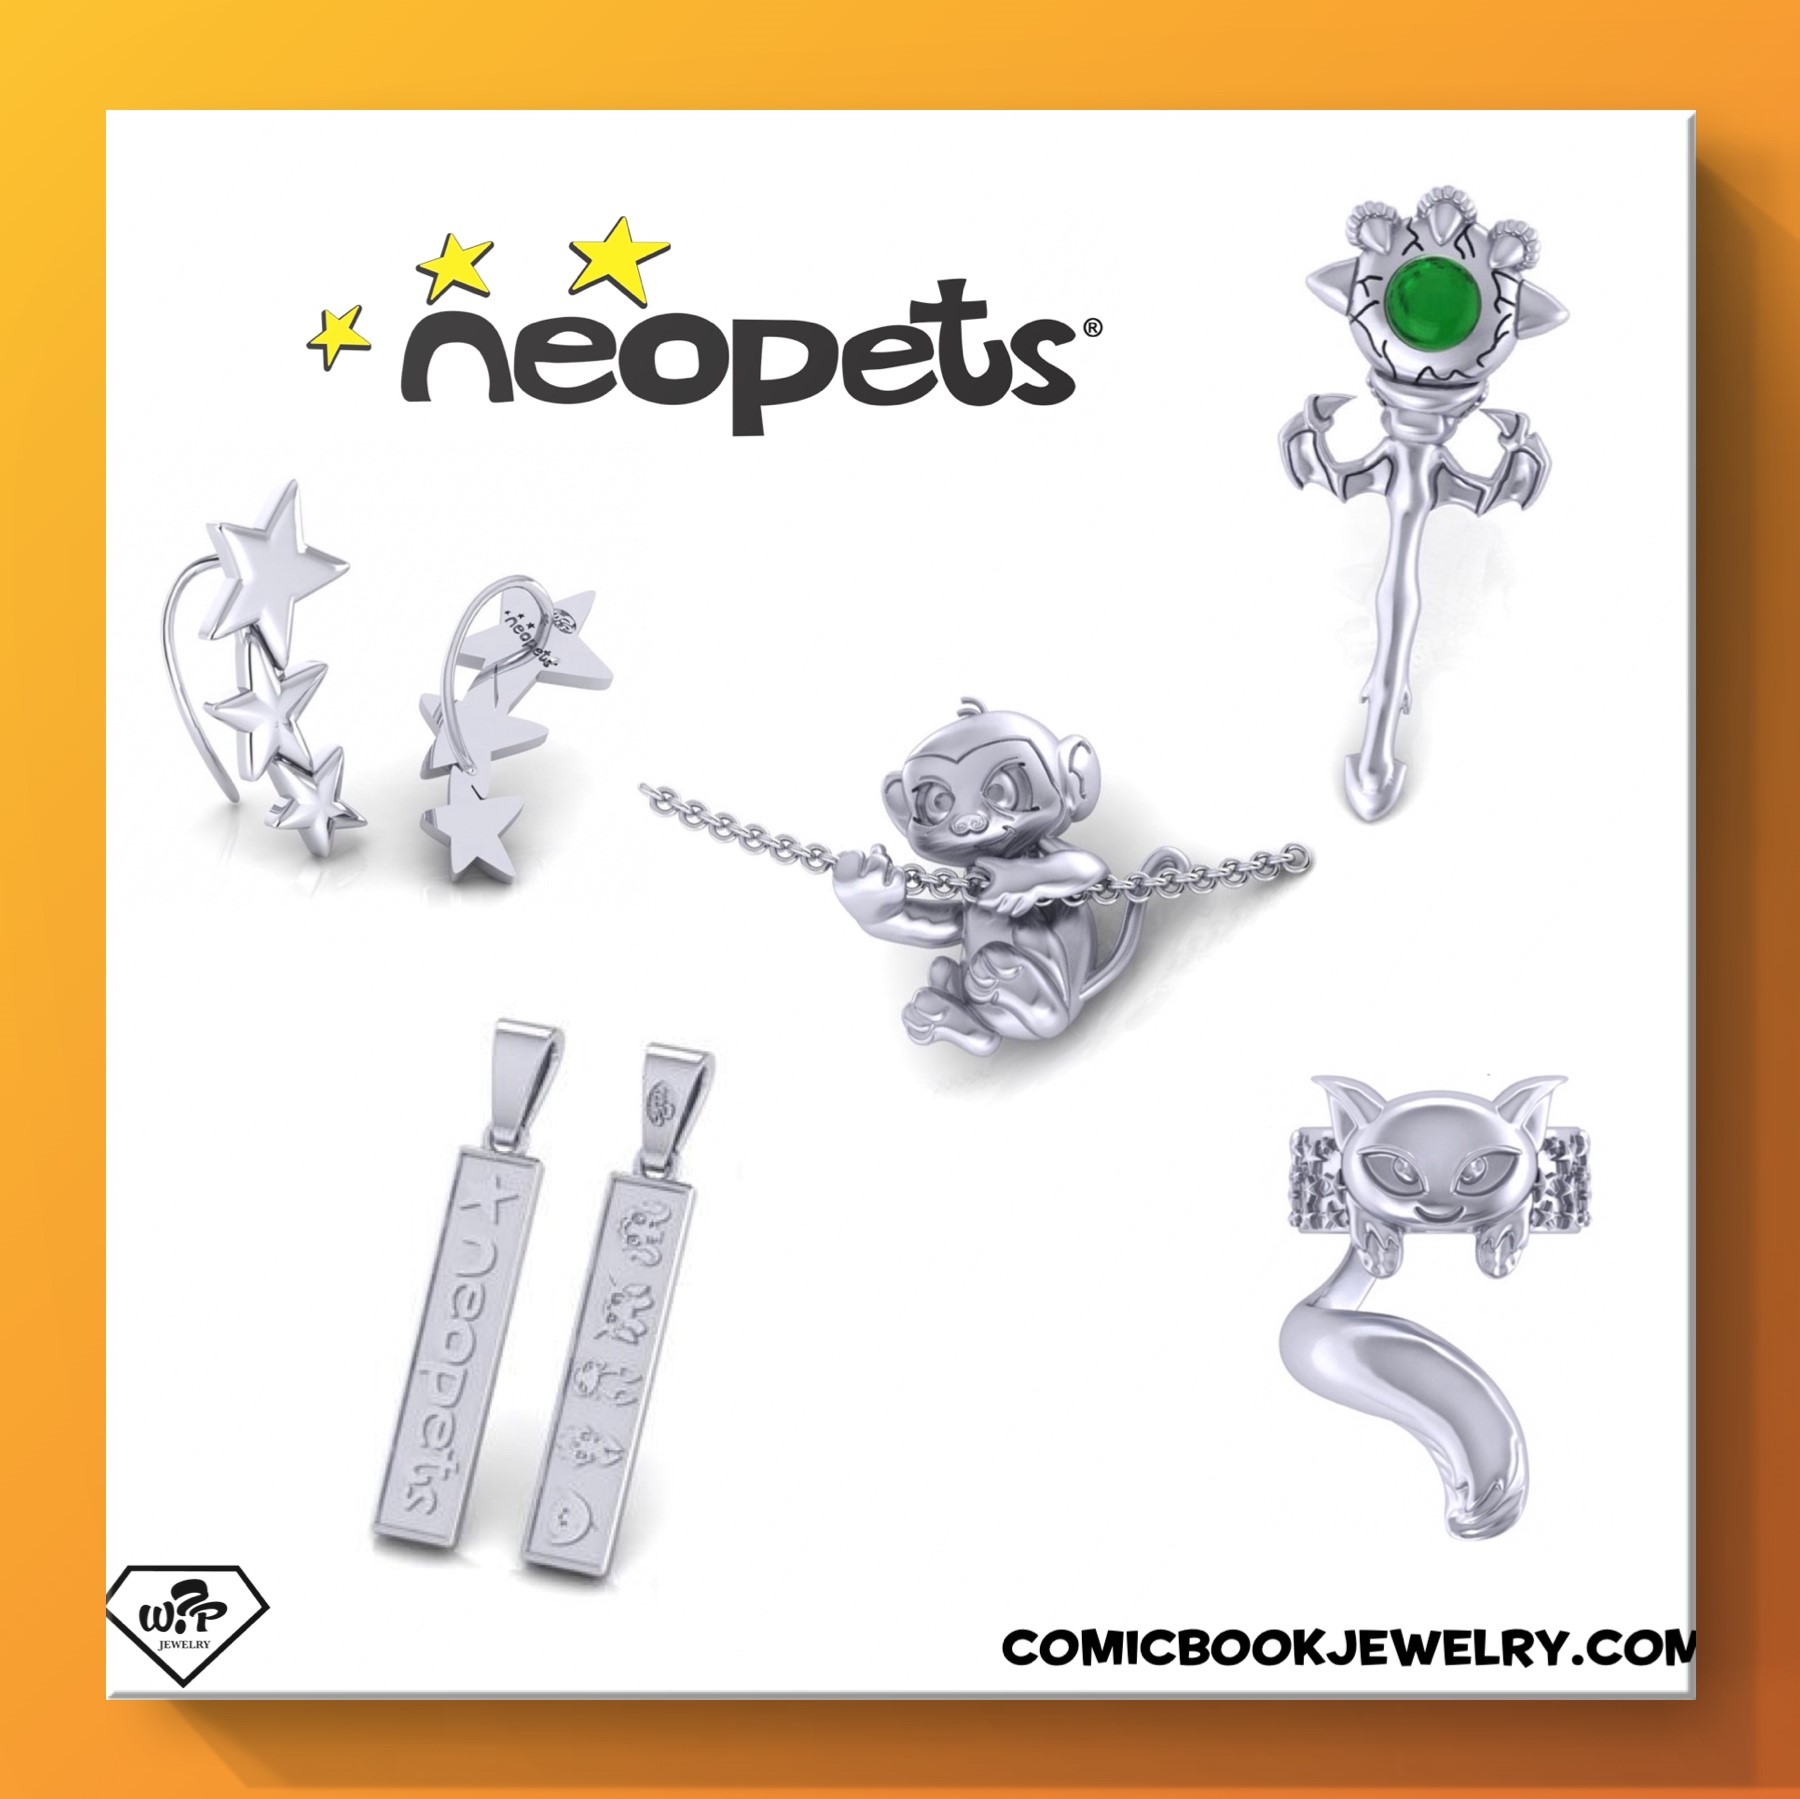 https://images.neopets.com/images/nf/sdcc_jewelry.png